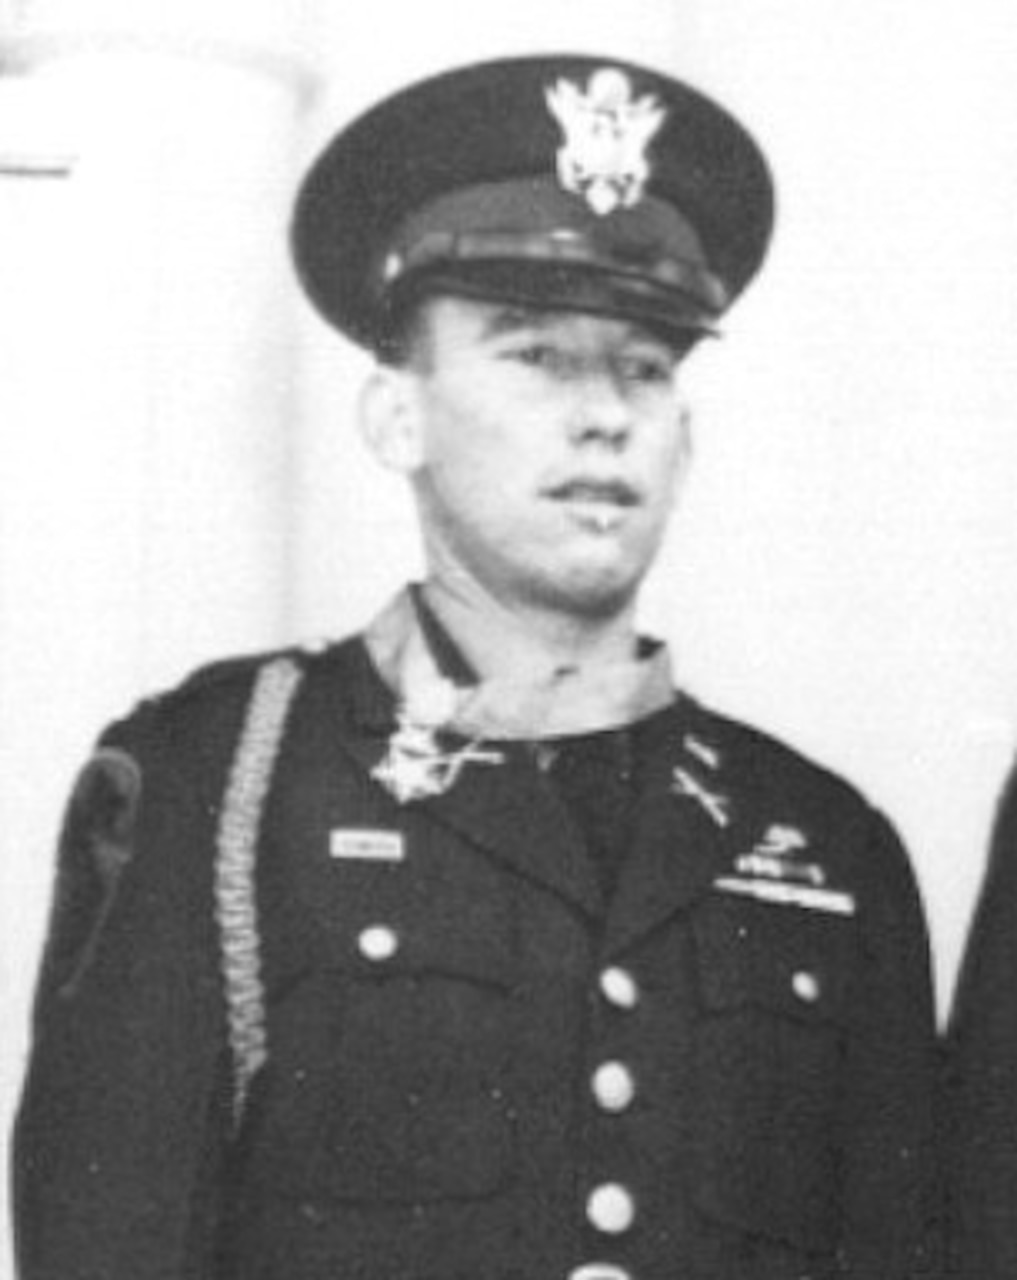 A man in dress uniform and cap wears a medal around his neck.